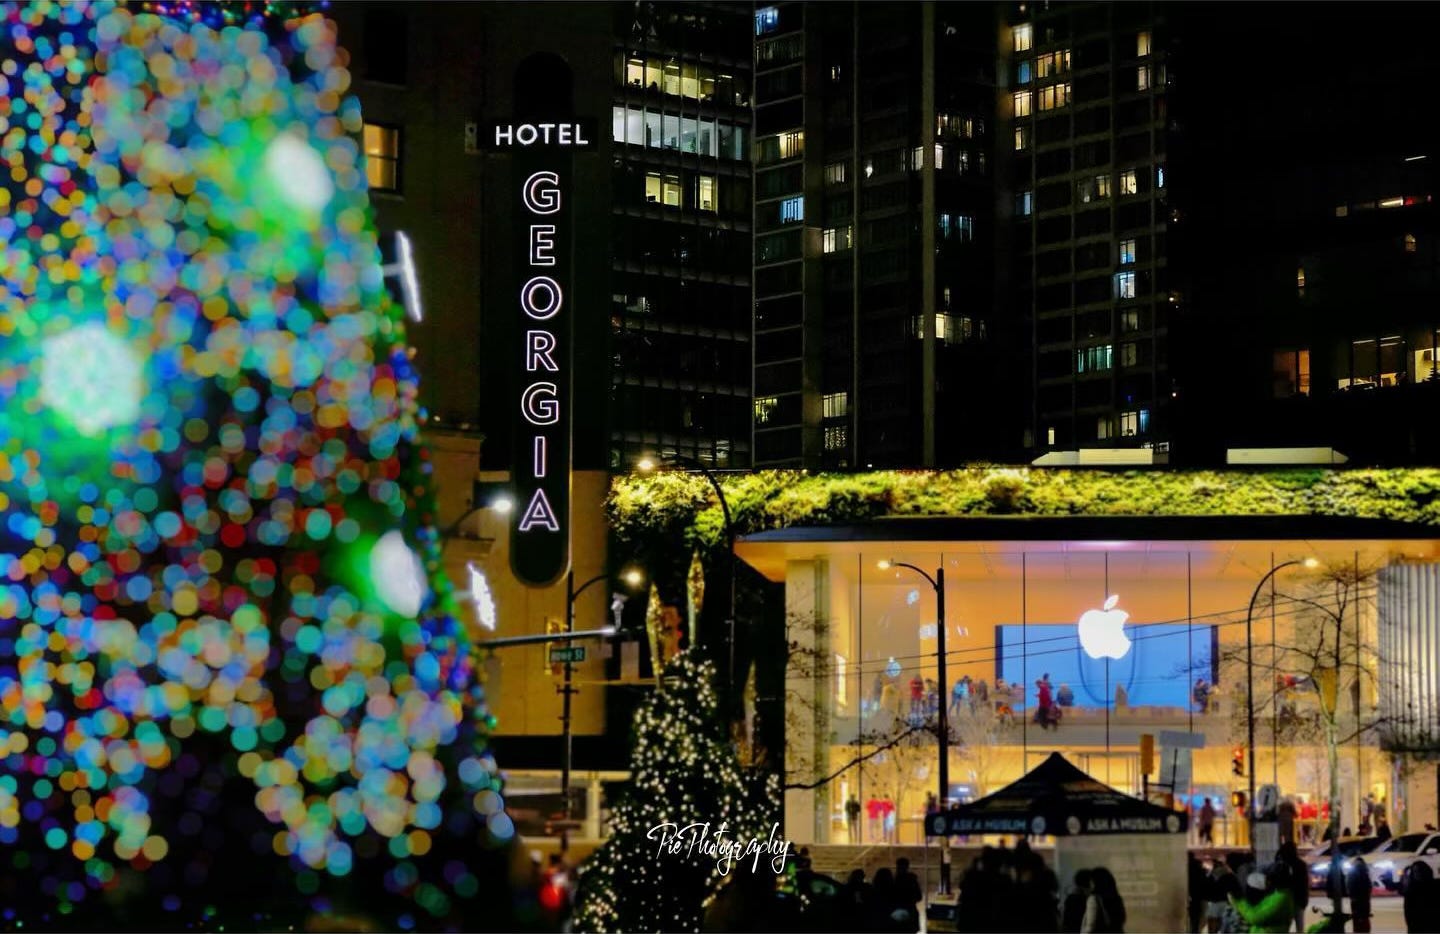 Apple Pacific Centre photographed at night. In the foreground, bright holiday decorations including a tree full of lights are obscured with soft bokeh.